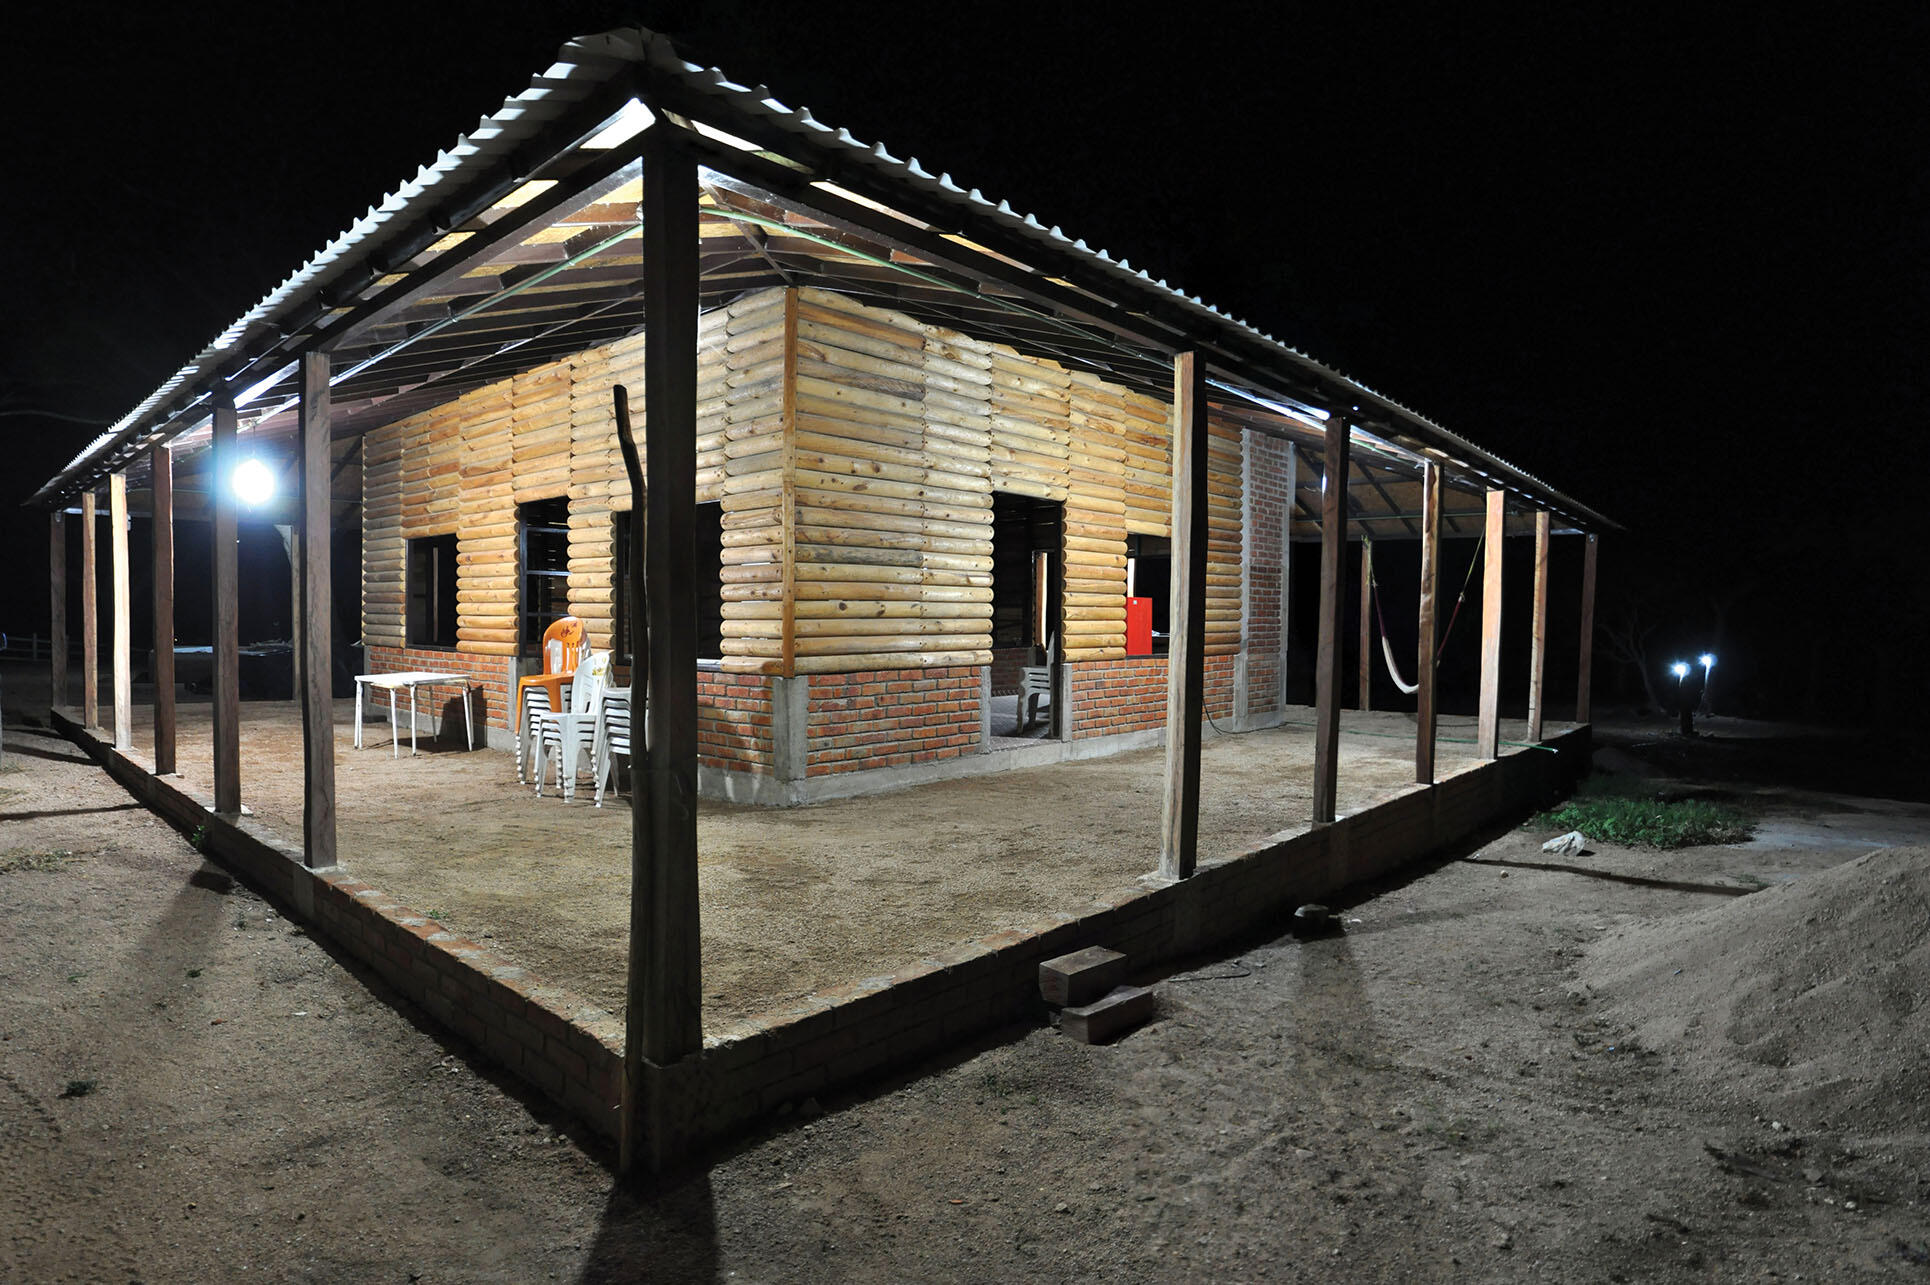 Photo of a log cabin at night, a newly built private residence in an ejido in southern Mexico. (Photo by Eduardo Robles Pacheco.)